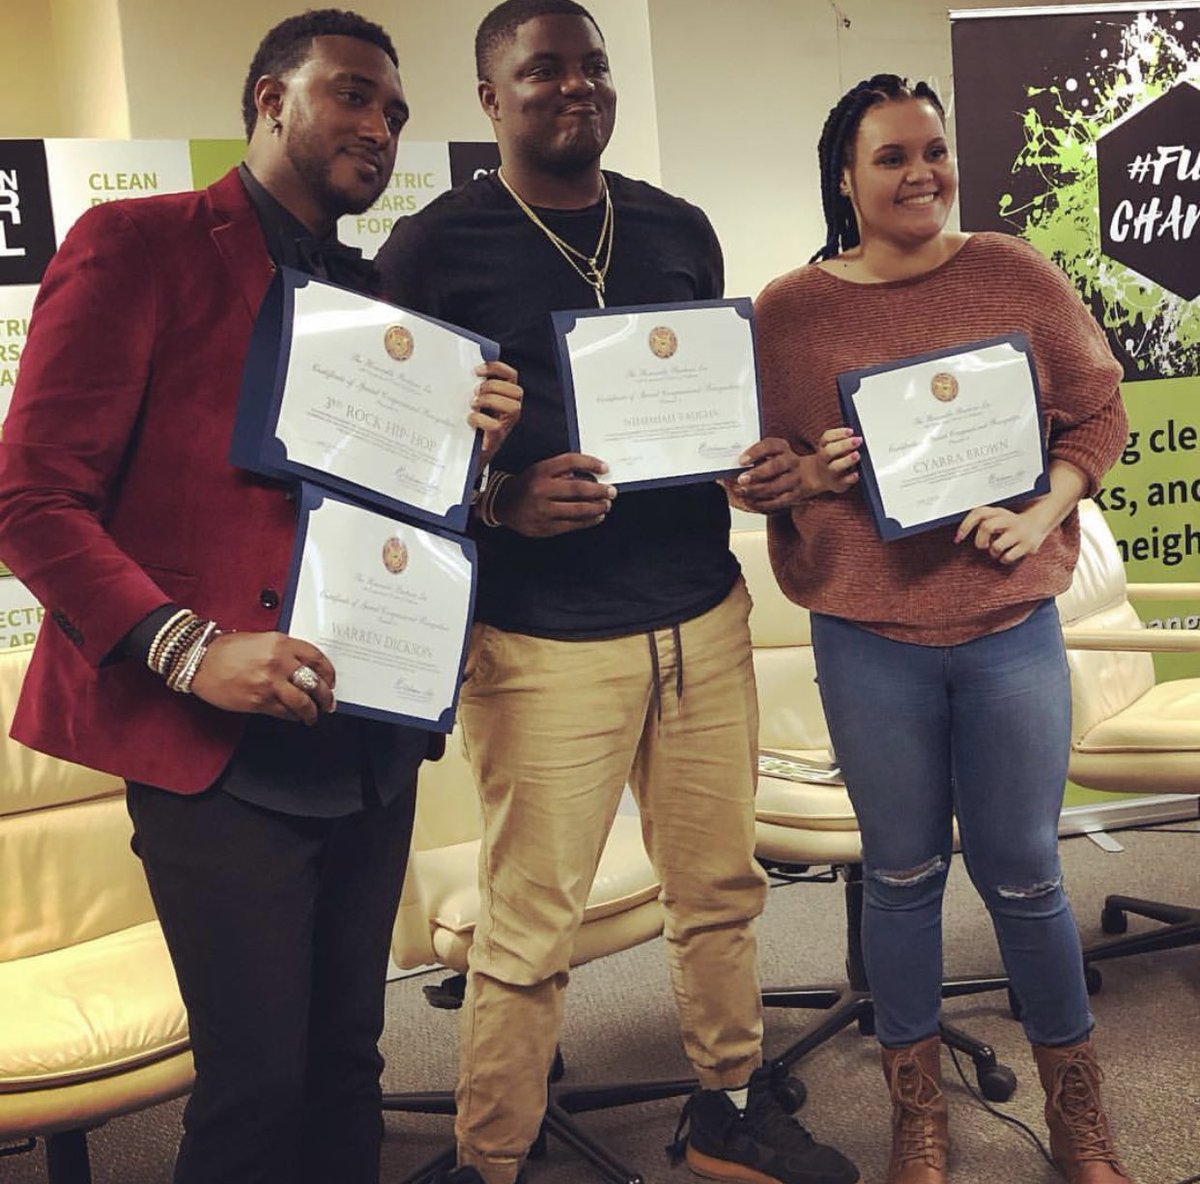 Thank you so much @RepBarbaraLee for honoring these incredible artists who are making a difference where they live. #fuelchange @3rdRockHipHop @cyarrabrown